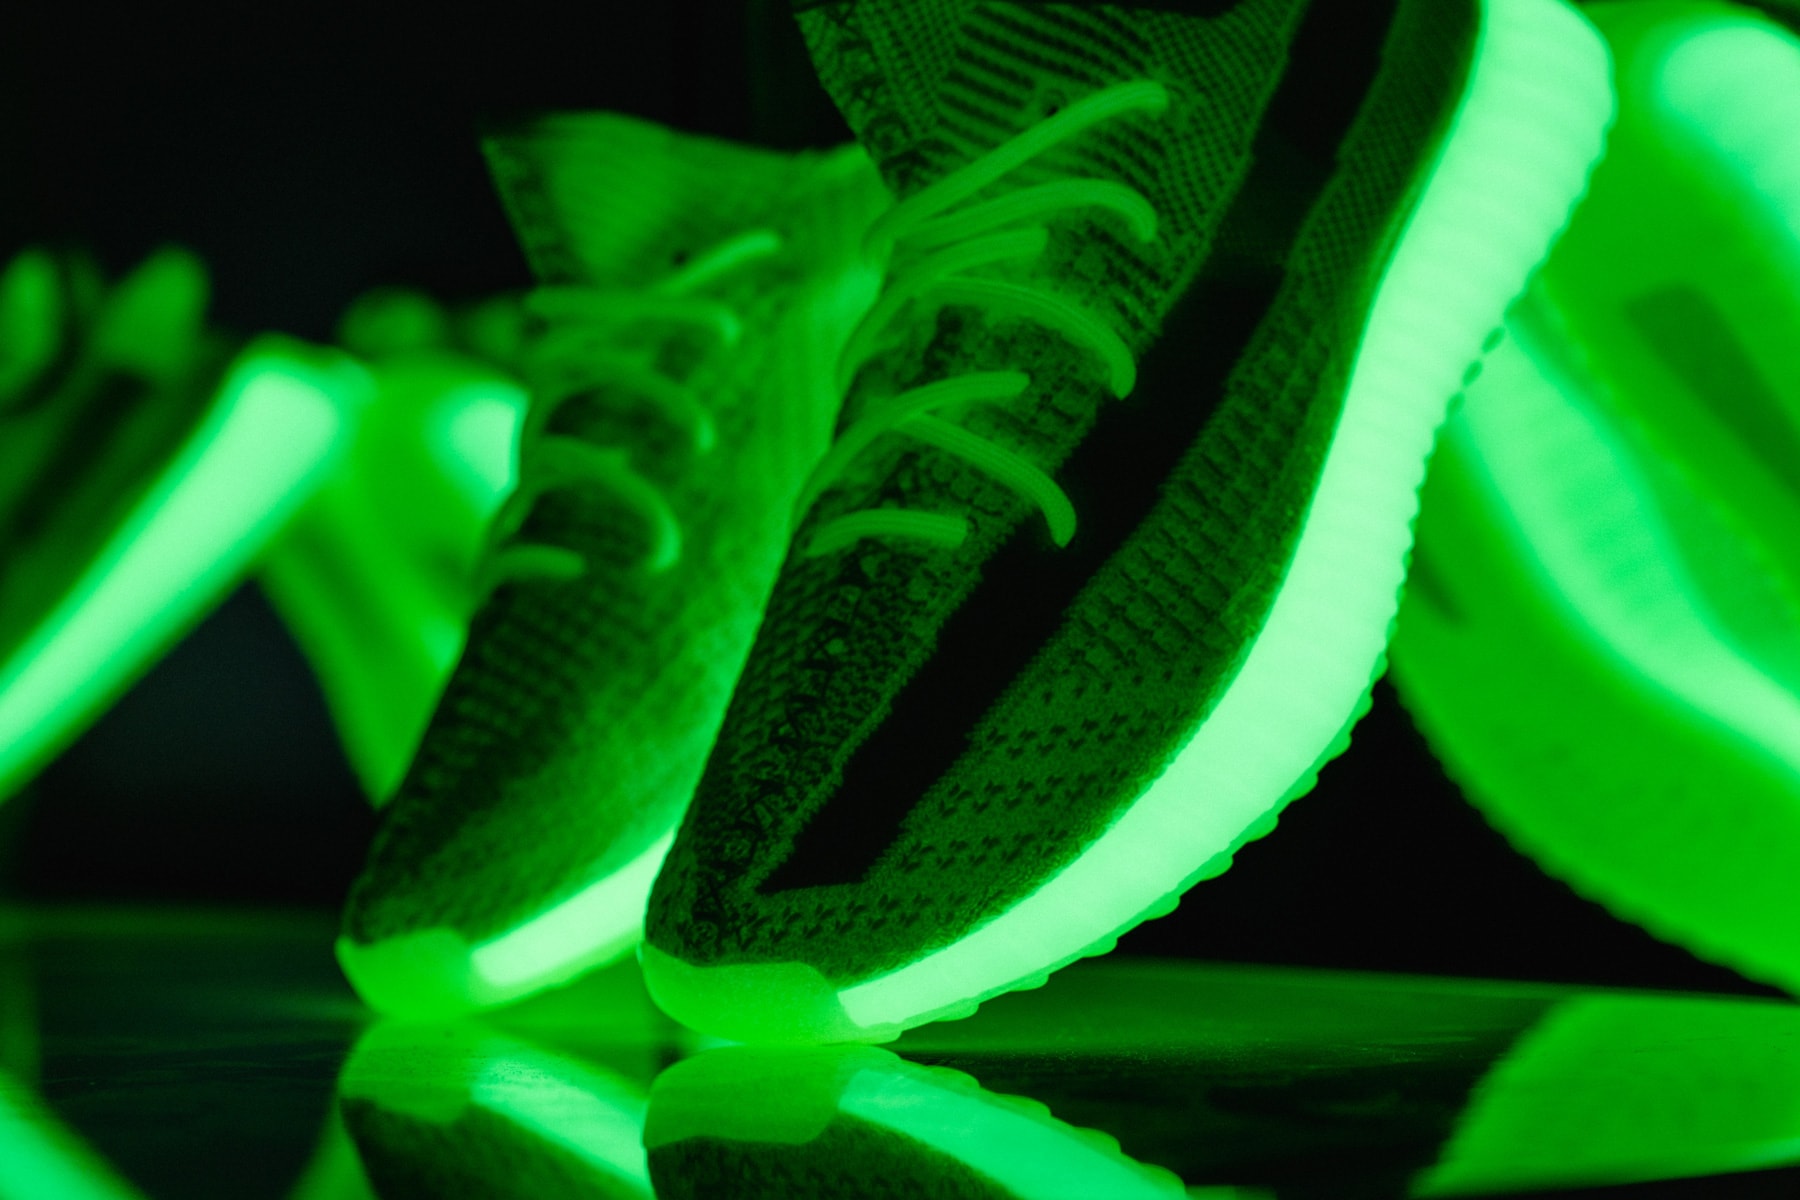 YEEZY BOOST 350 V2 "Glow-in-the-Dark" Closer Look kanye west three stripes